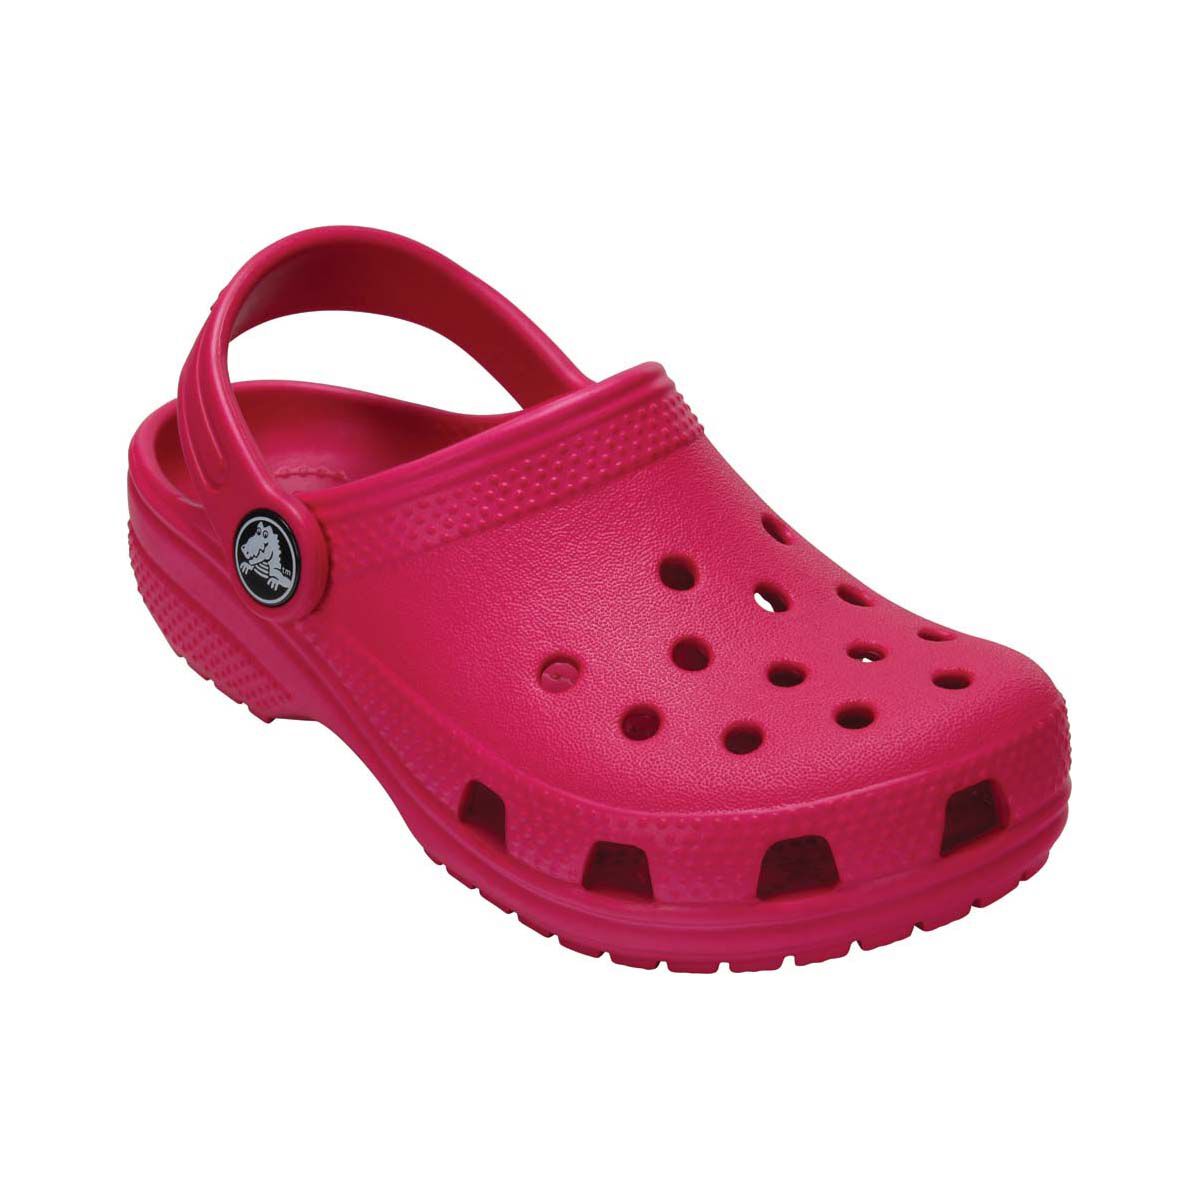 crocs size for one year old